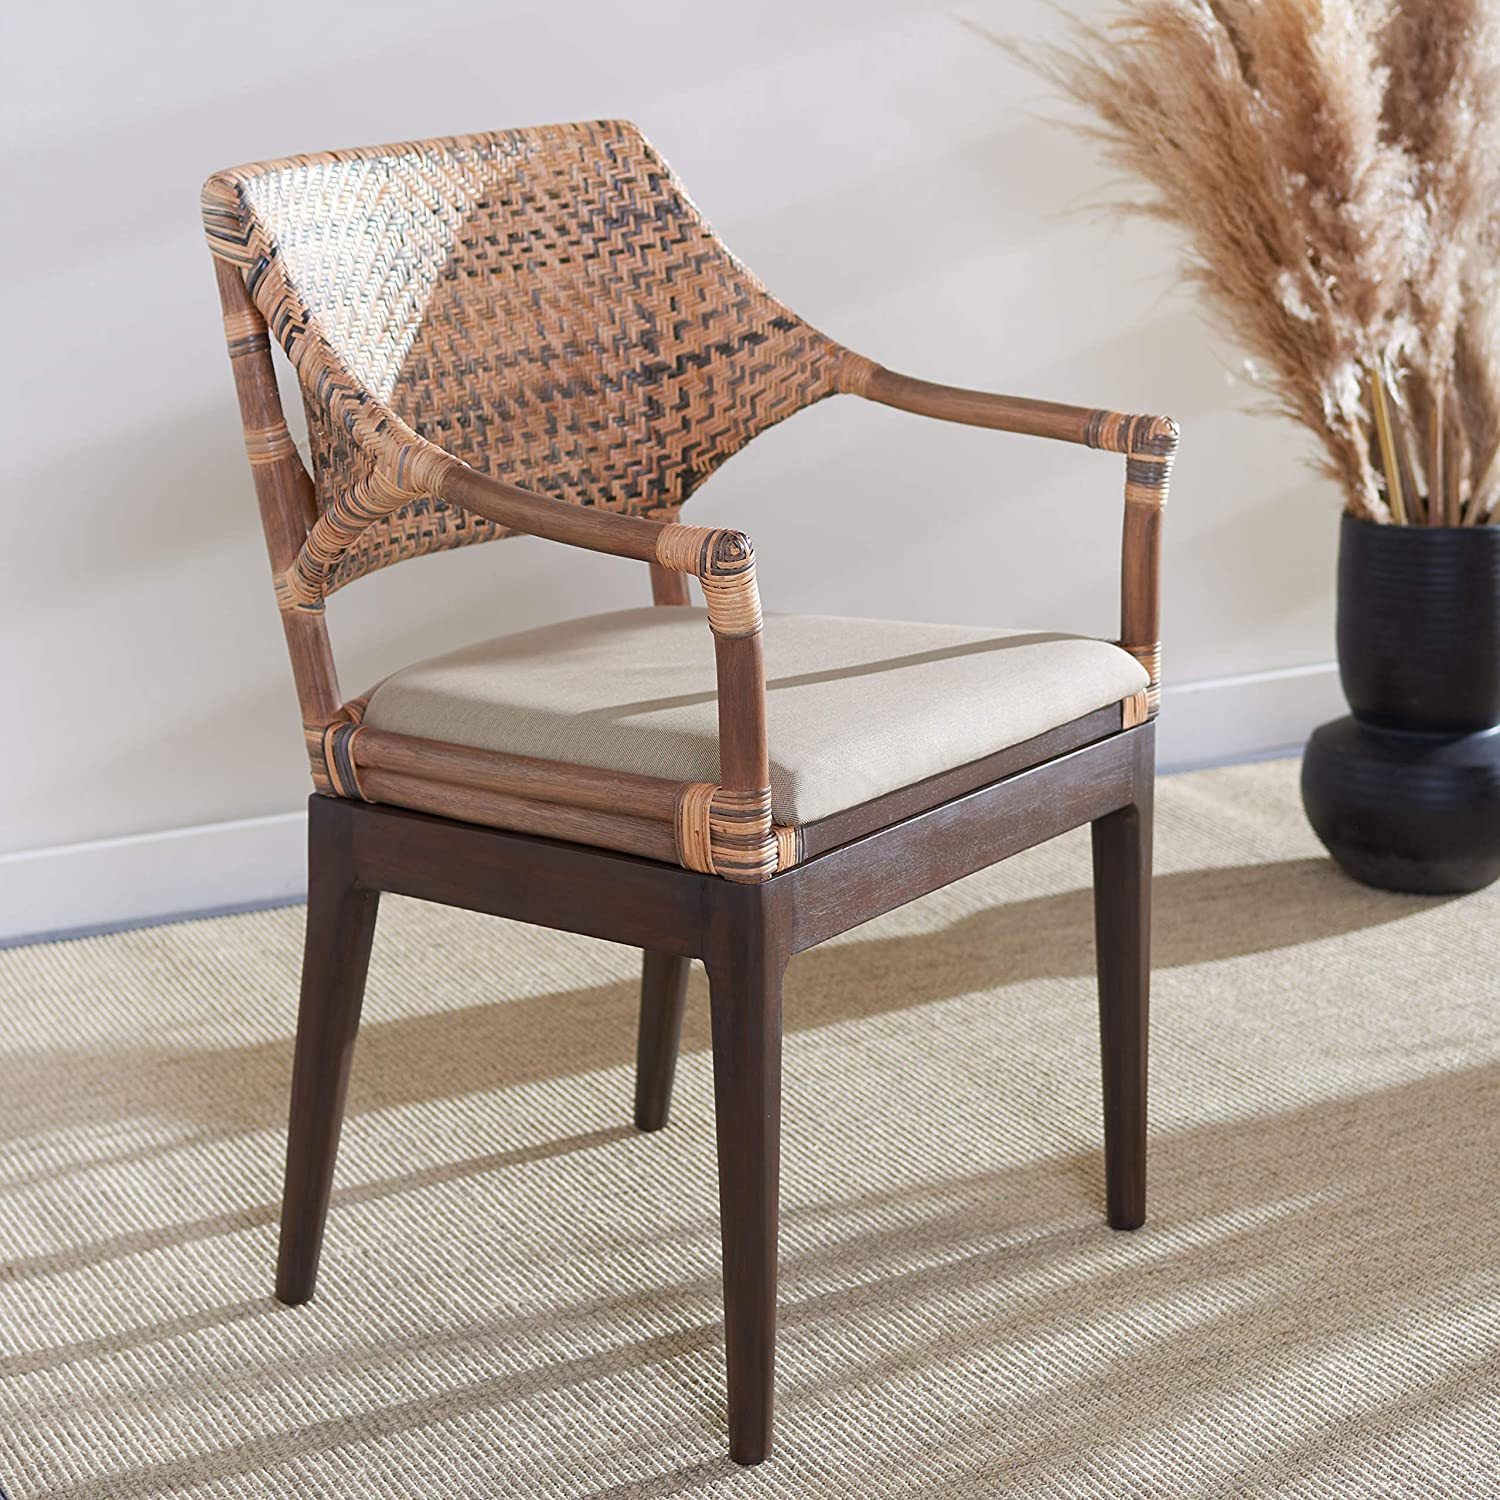 Carlo Arm Chair, Honey, From The Safavieh Home Collection. - $370.98